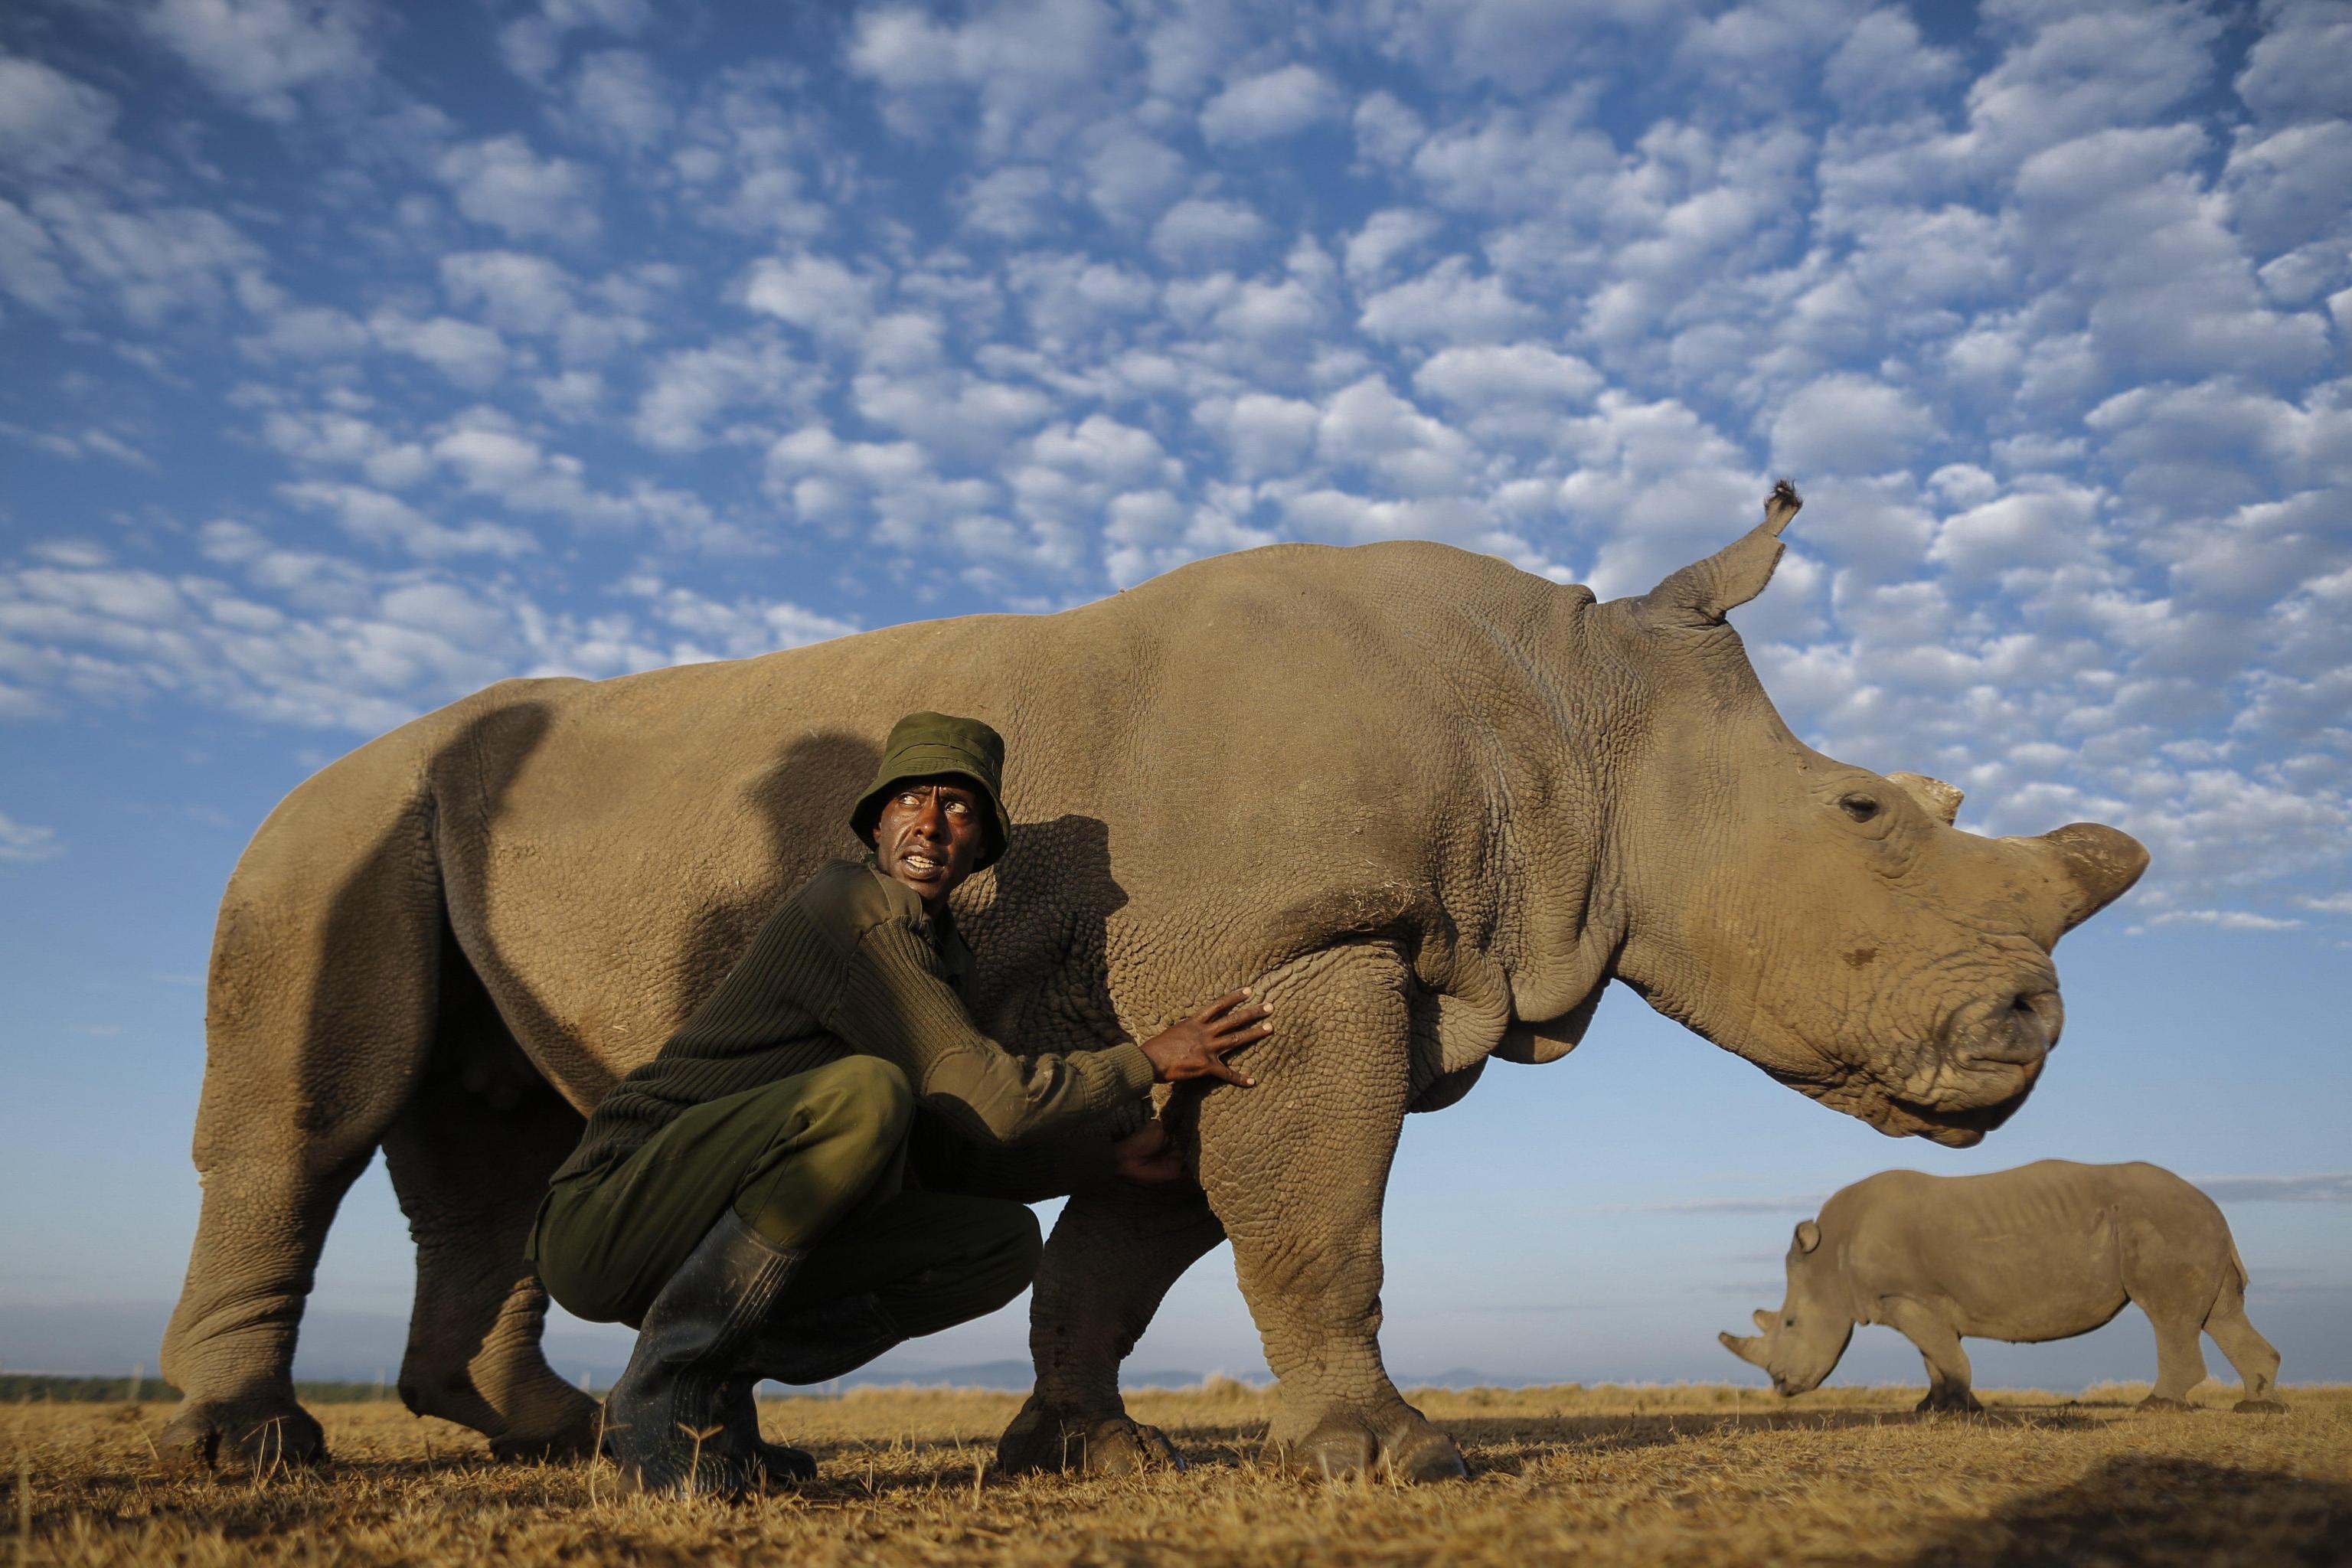 epa06615213 (FILE) - A rhino caretaker Mohammed Doyo caresses one of two surviving female northern white rhinos, Najin, at Ol Pejeta Conservancy near Nanyuki, some 200km north of Nairobi, Kenya, 18 February 2015 (reissued 20 March 2018). Ol Pejeta Conservancy, where the world's last surviving male northern whino rhino Sudan and two female northern white rhinos live,  announced on 20 March that forty five-year-old Sudan has died at the Conservancy on 19 March. Sudan was suffering from degenerative changes in muscles and bones combined with skin wounds so that the veterinary team had to make a decision to euthanize him, Ol Pejeta Conservancy said in a statement. With Sudan's death, the world is left with just two female nortthern whino rhinos.  EPA/DAI KUROKAWA